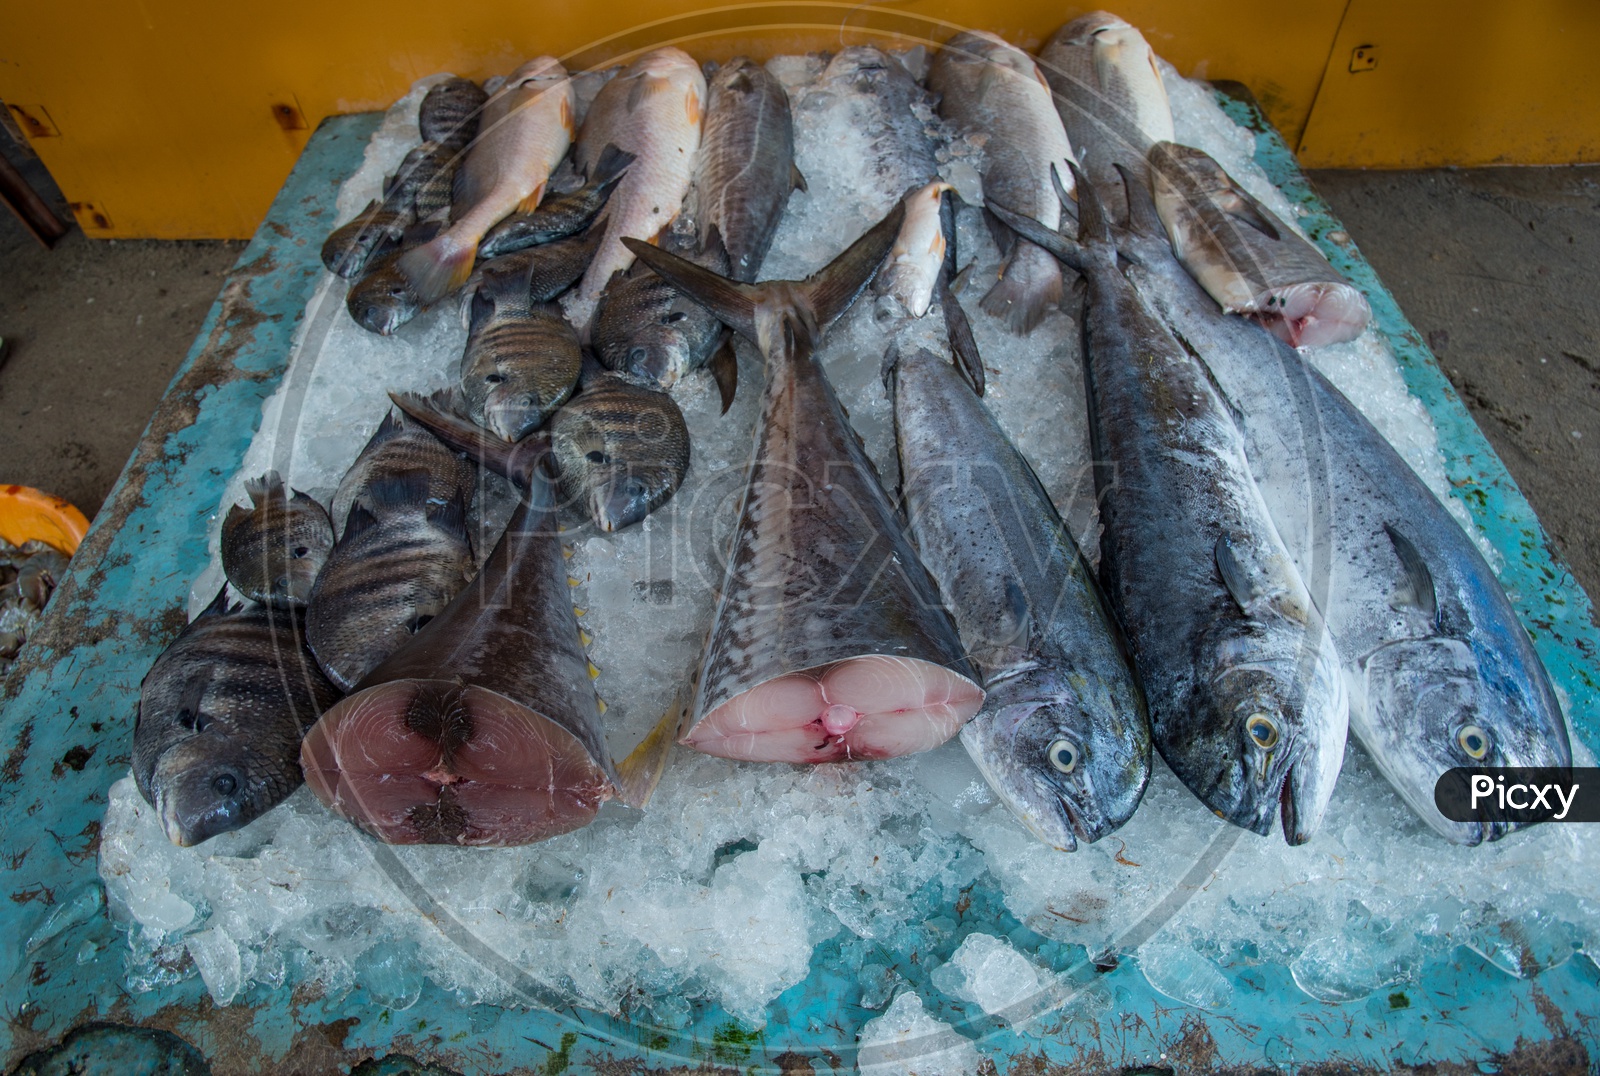 Different Sea Fish put up for Sale at Fort Kochi Beach,Kerala.